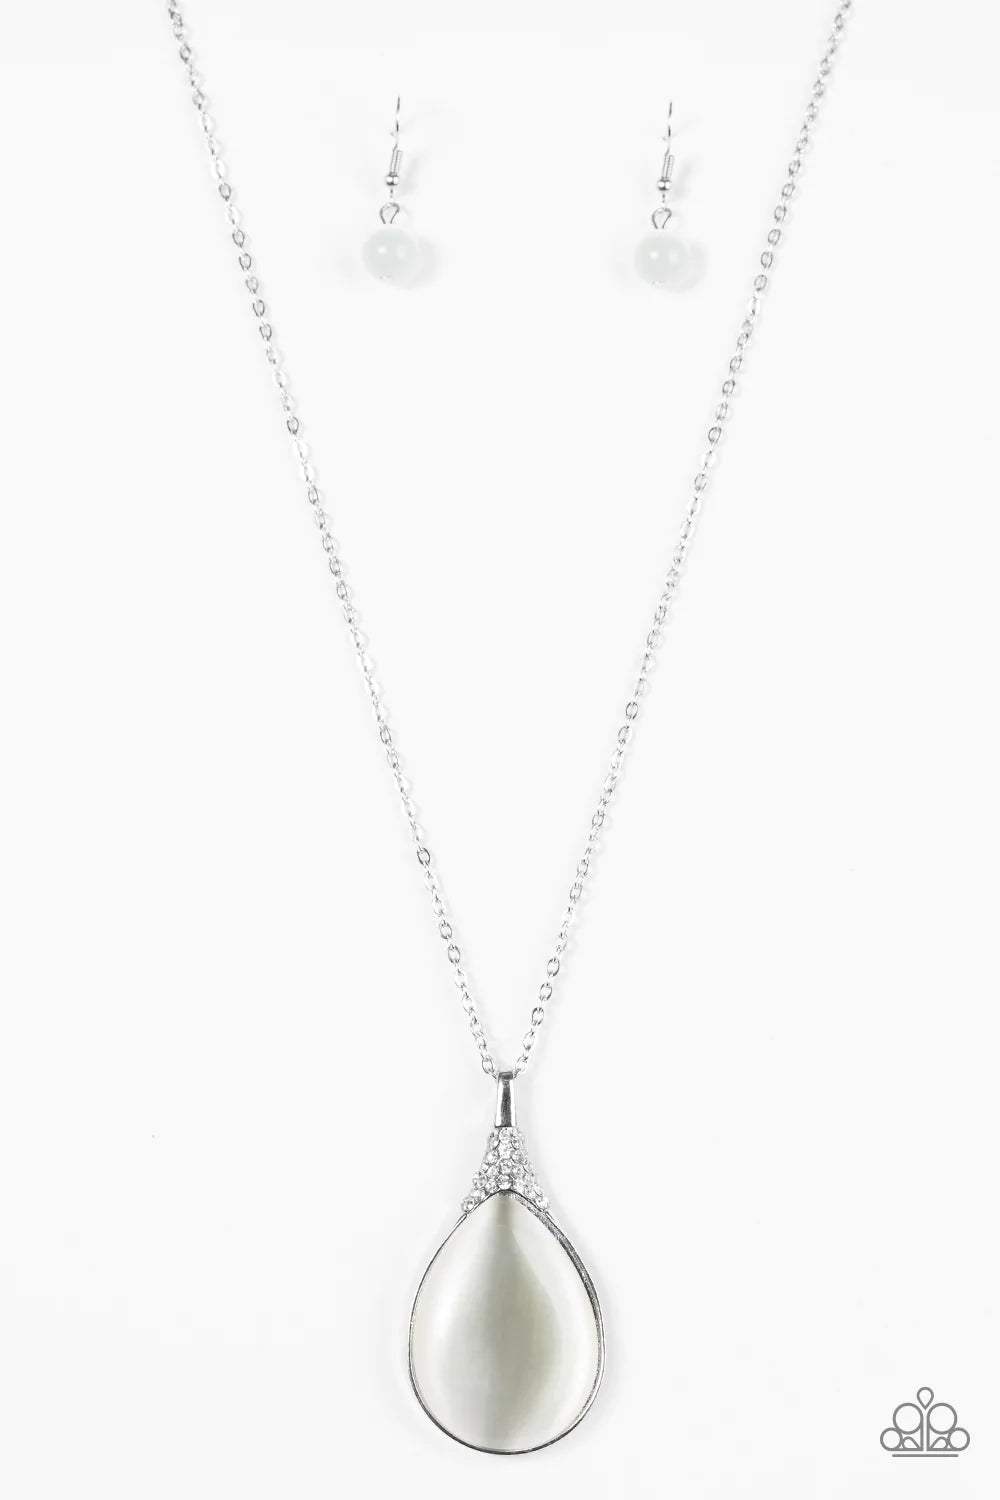 Paparazzi Necklace ~ Timelessly Tranquil - White